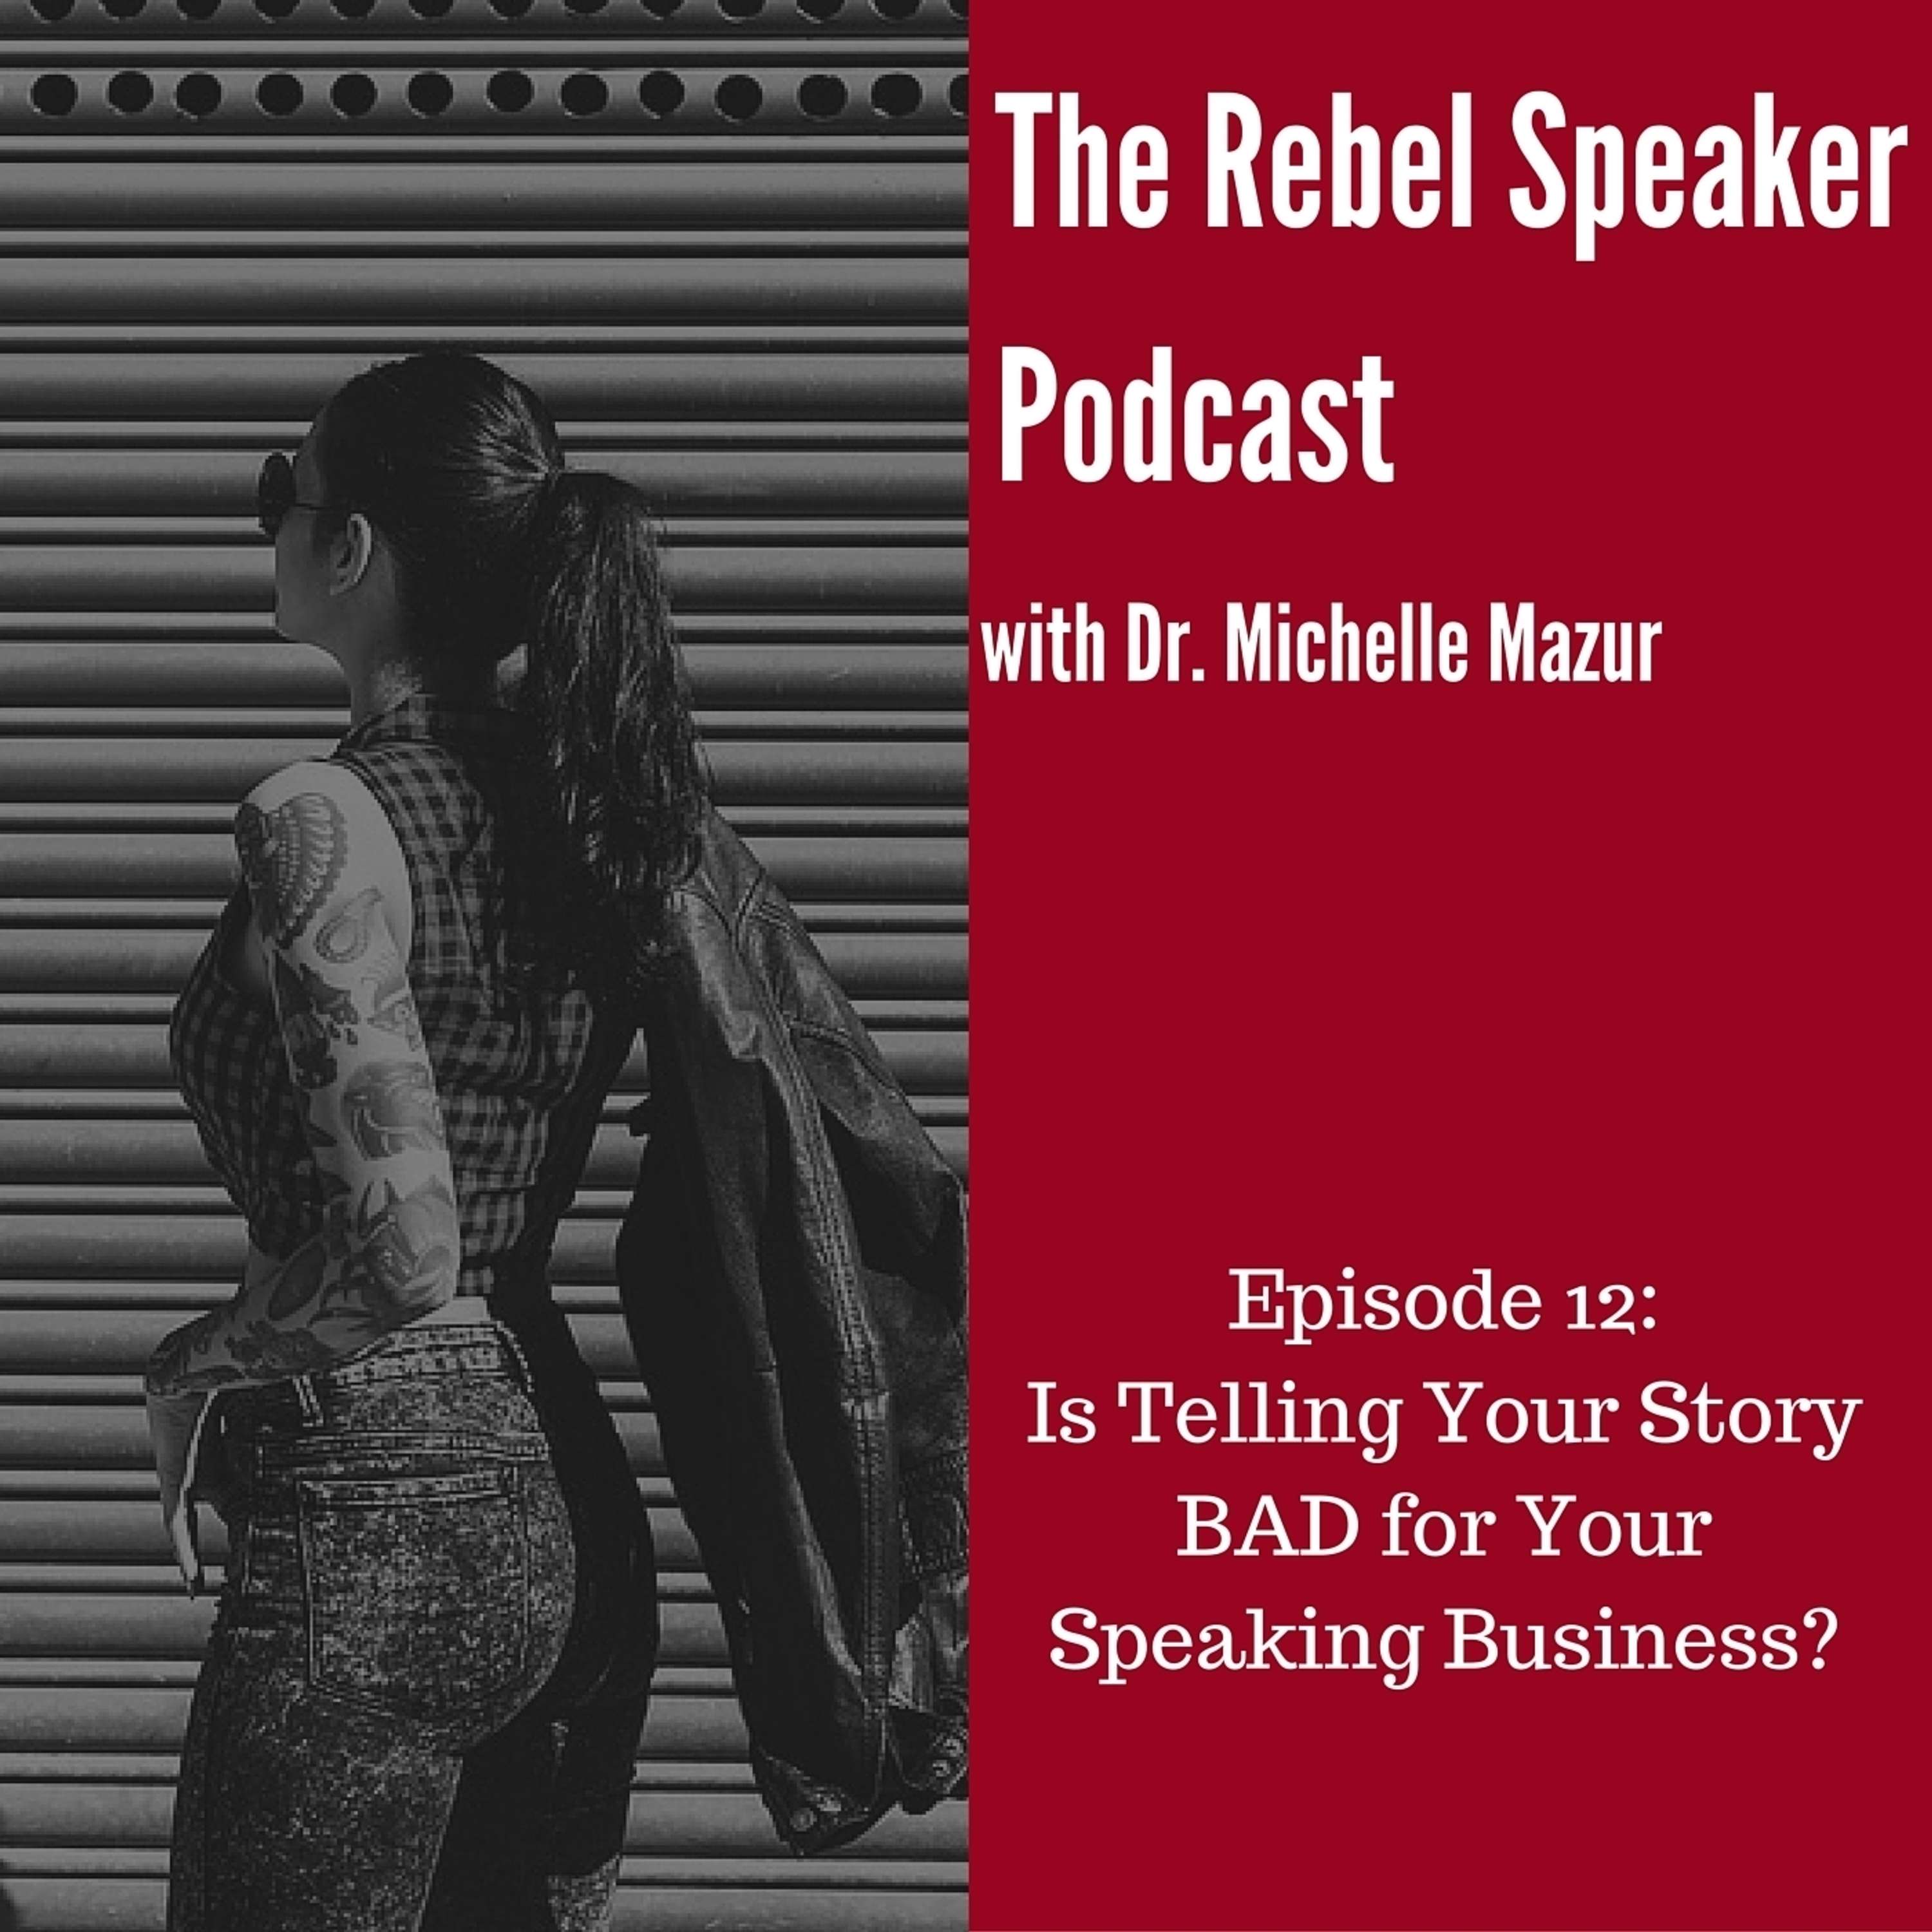 Is Sharing Your Story BAD for Your Speaking Business?